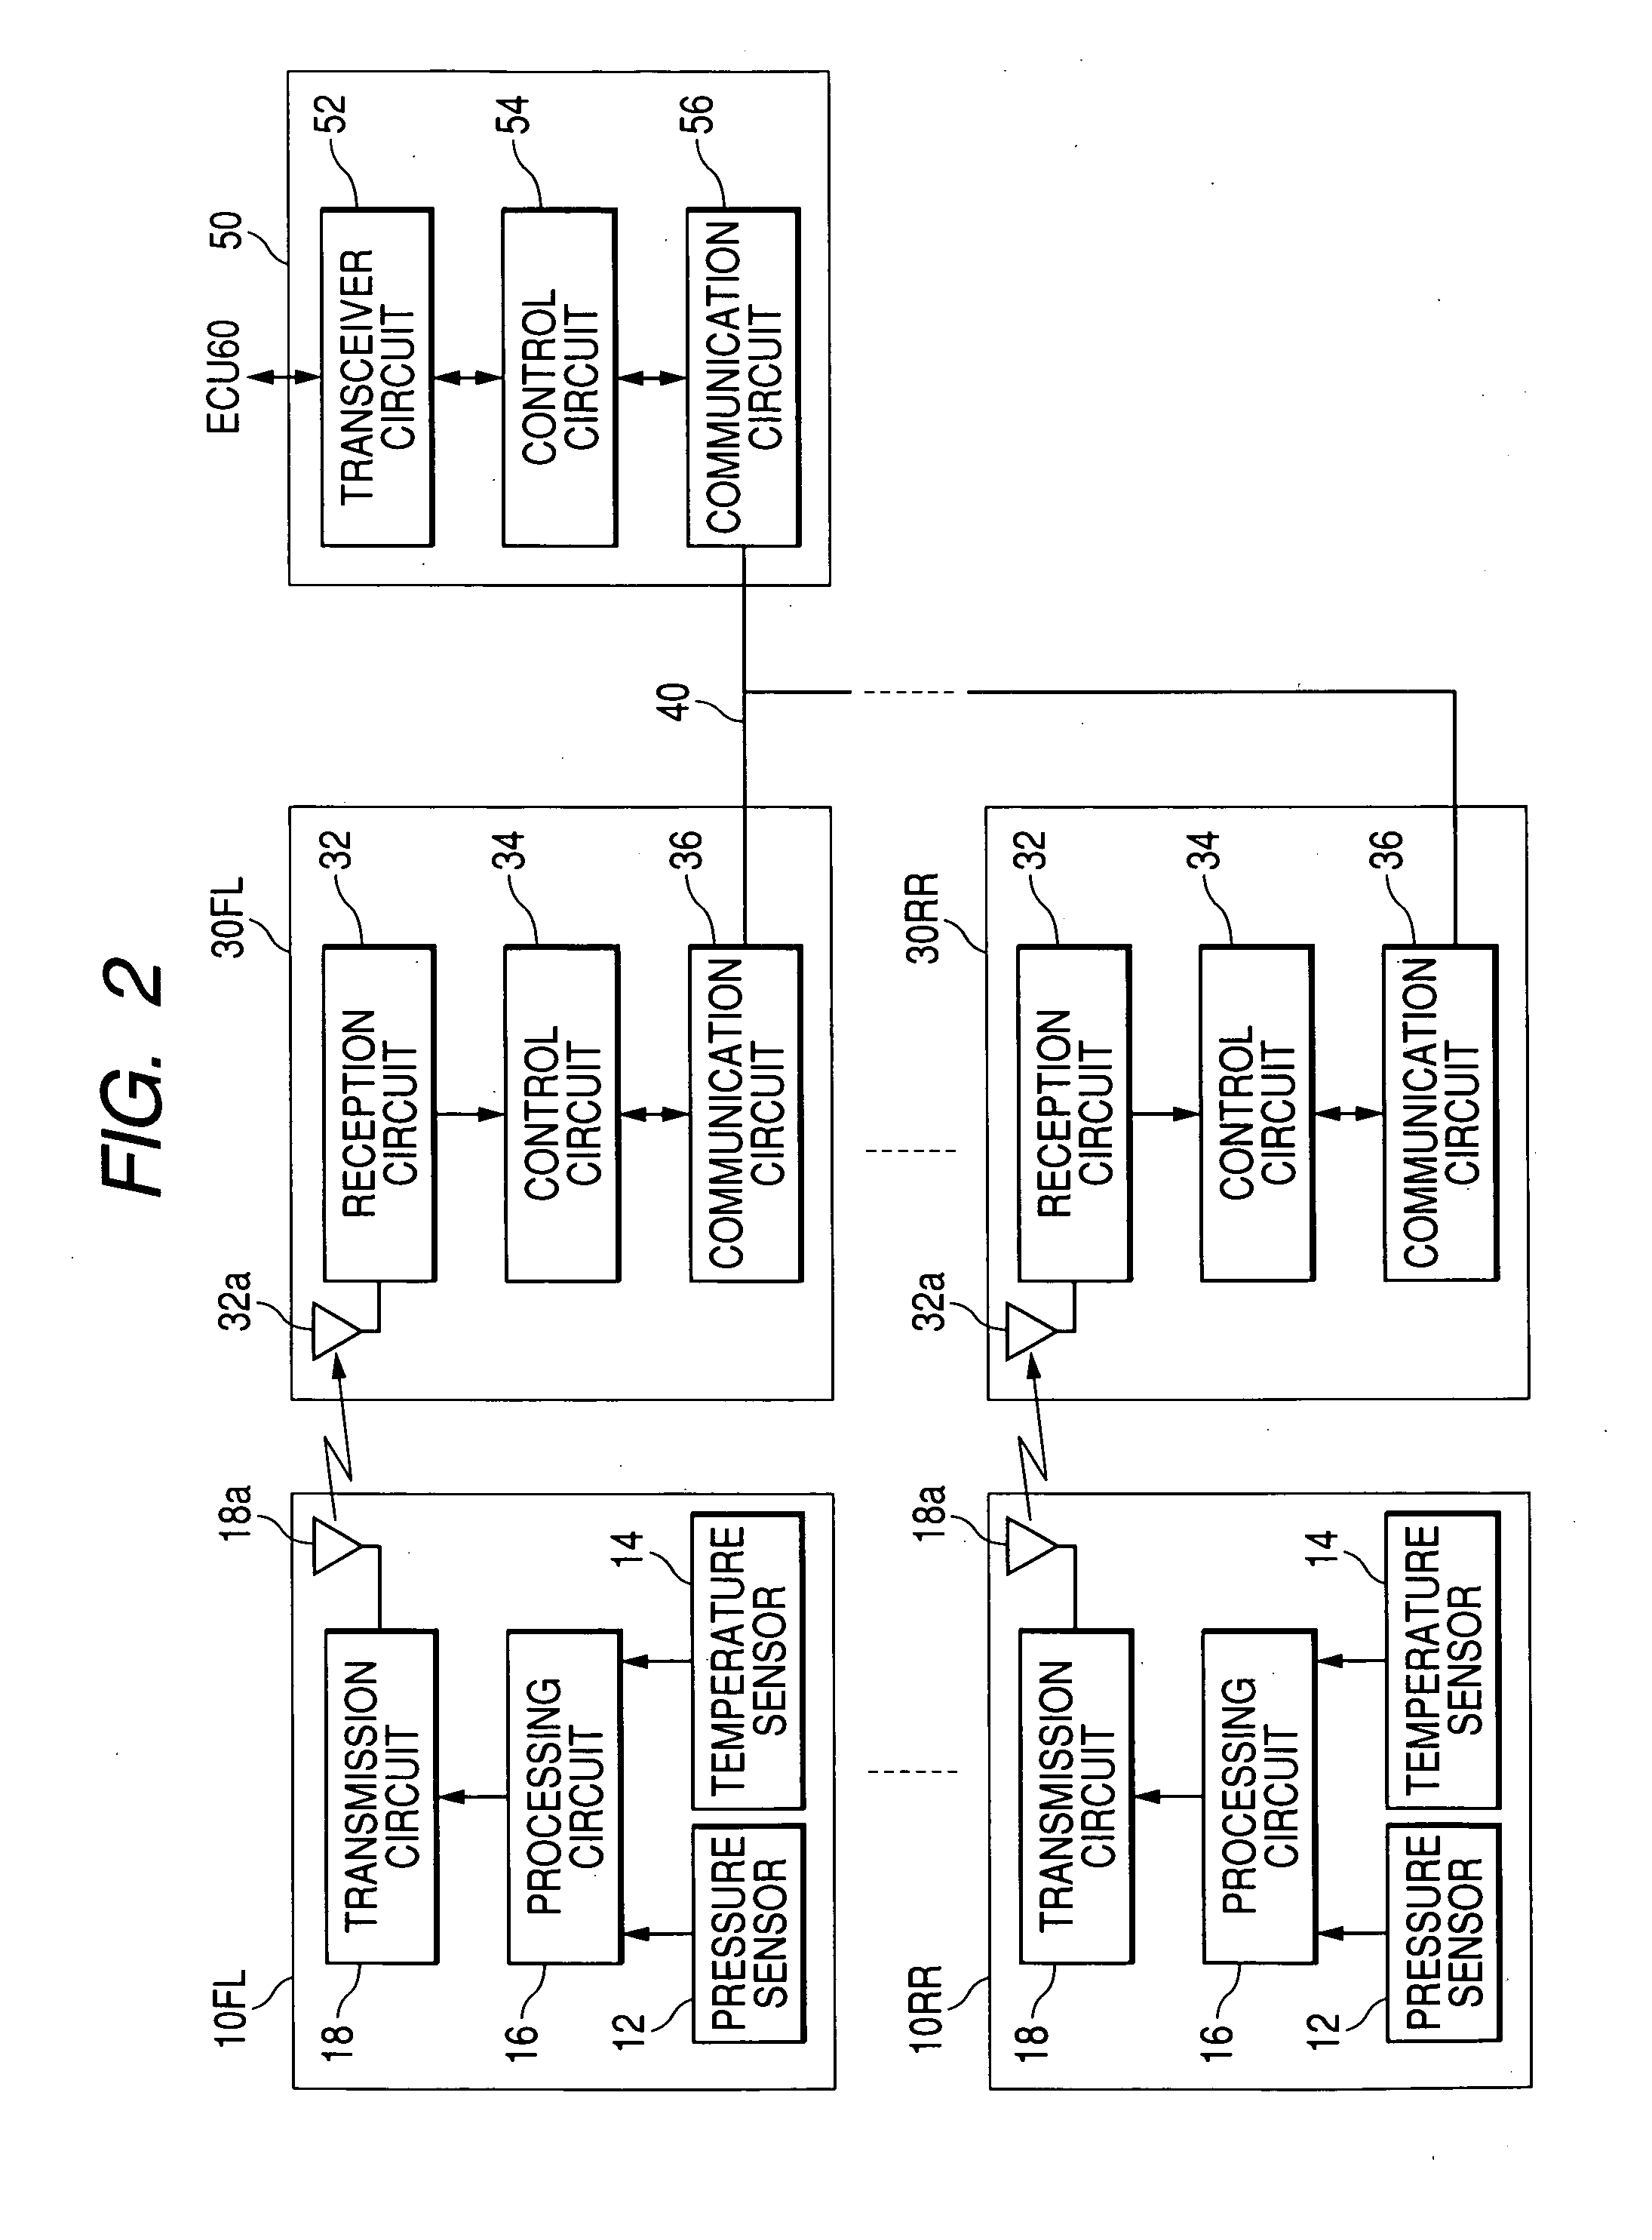 System for communicating between a master device and each of slave devices